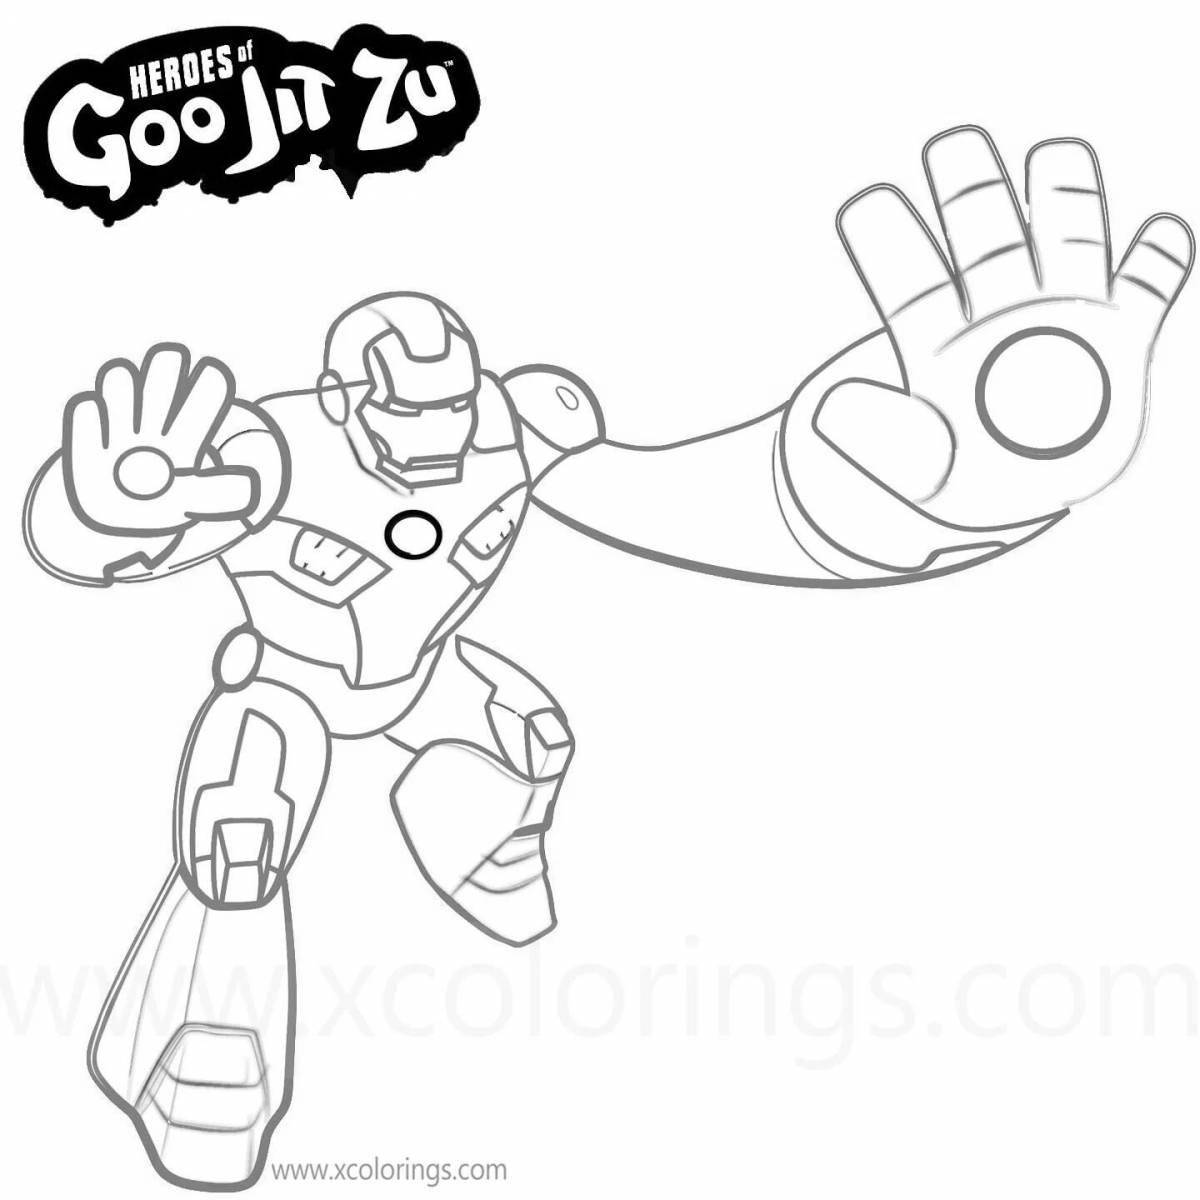 Playful gujutsu coloring book for toddlers